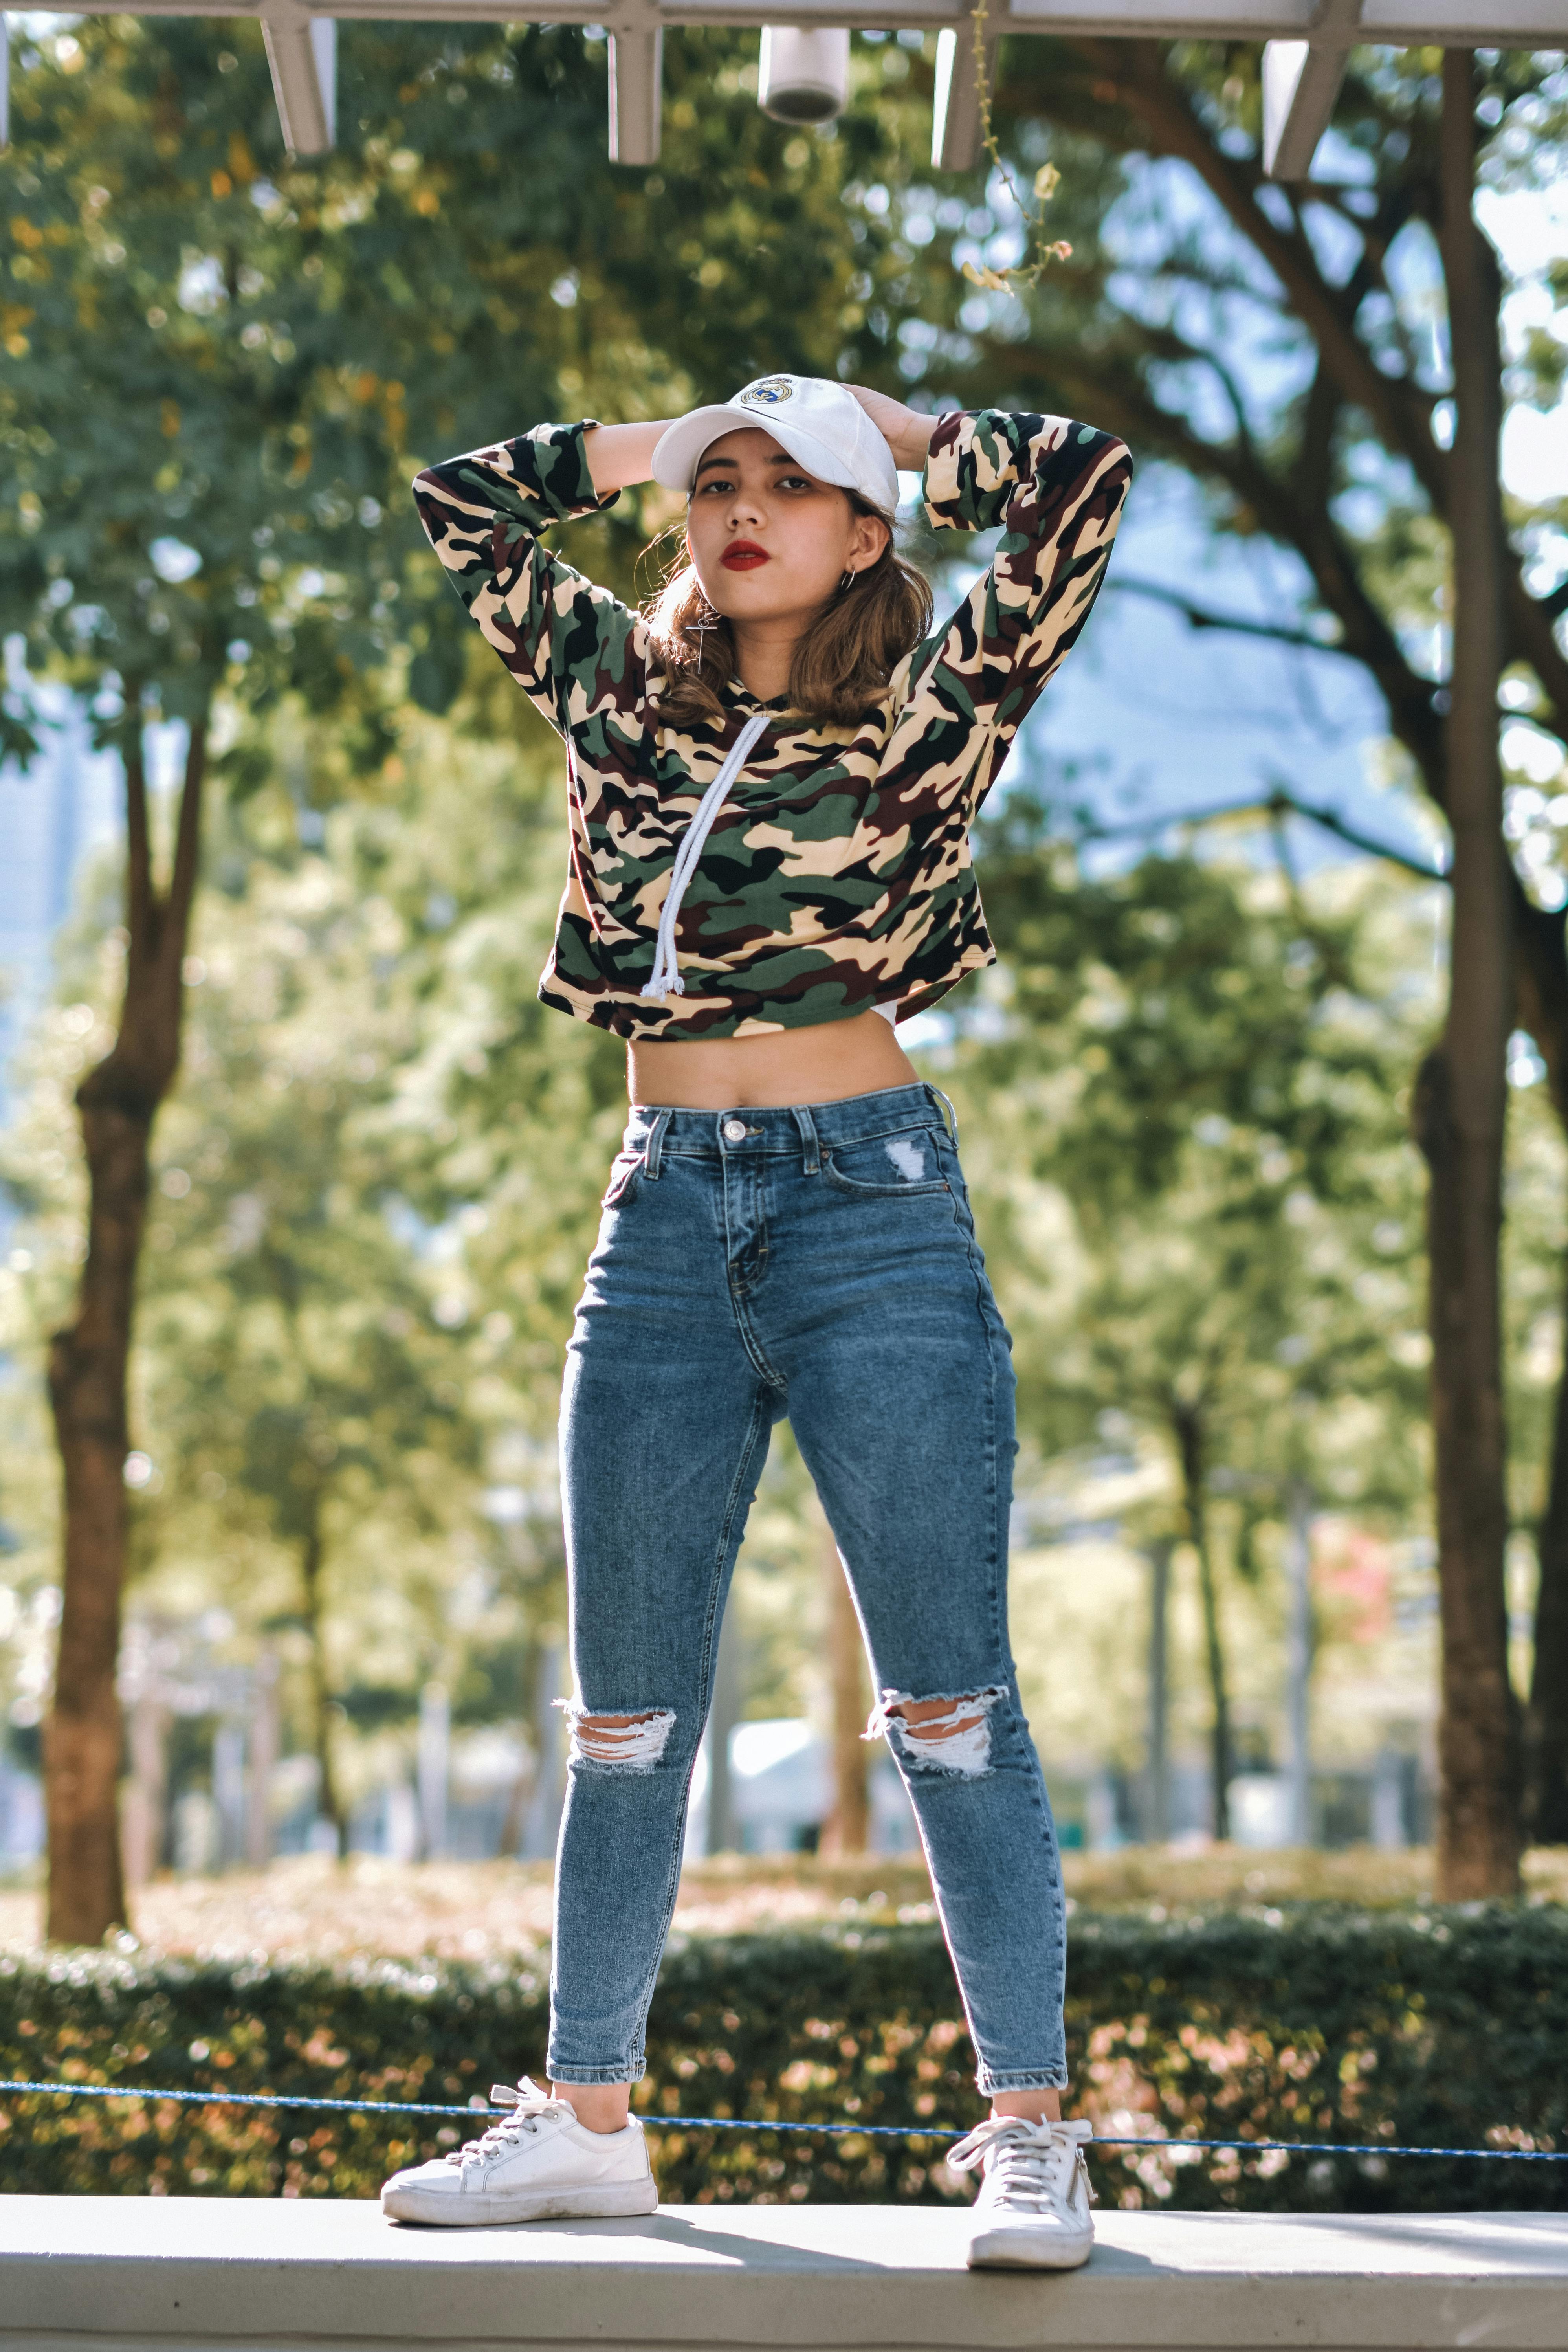 Photo of Woman in Camouflage Top and Denim Jeans Standing on a Stone Surface Posing Her Hands on Her Head Free Stock Photo